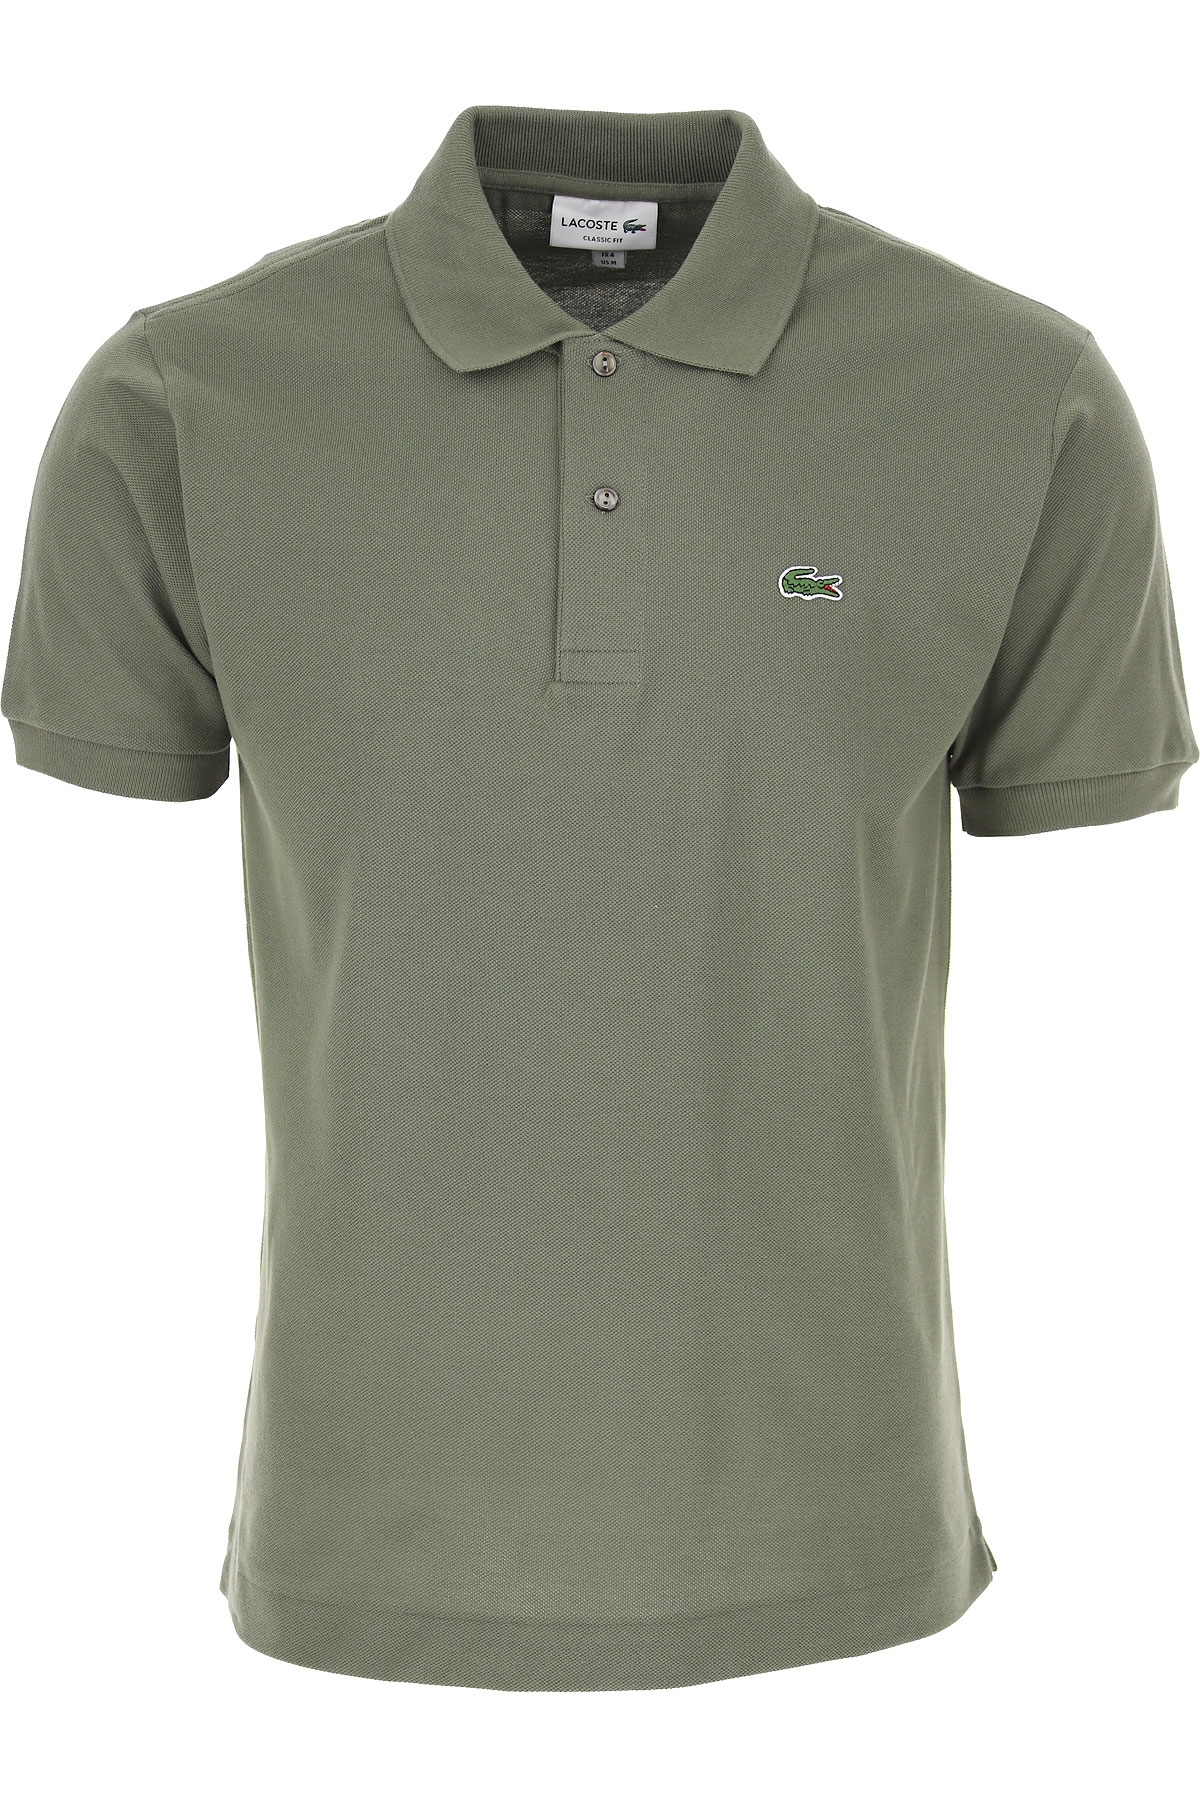 Mens Clothing Lacoste, Style code: 1212-316-